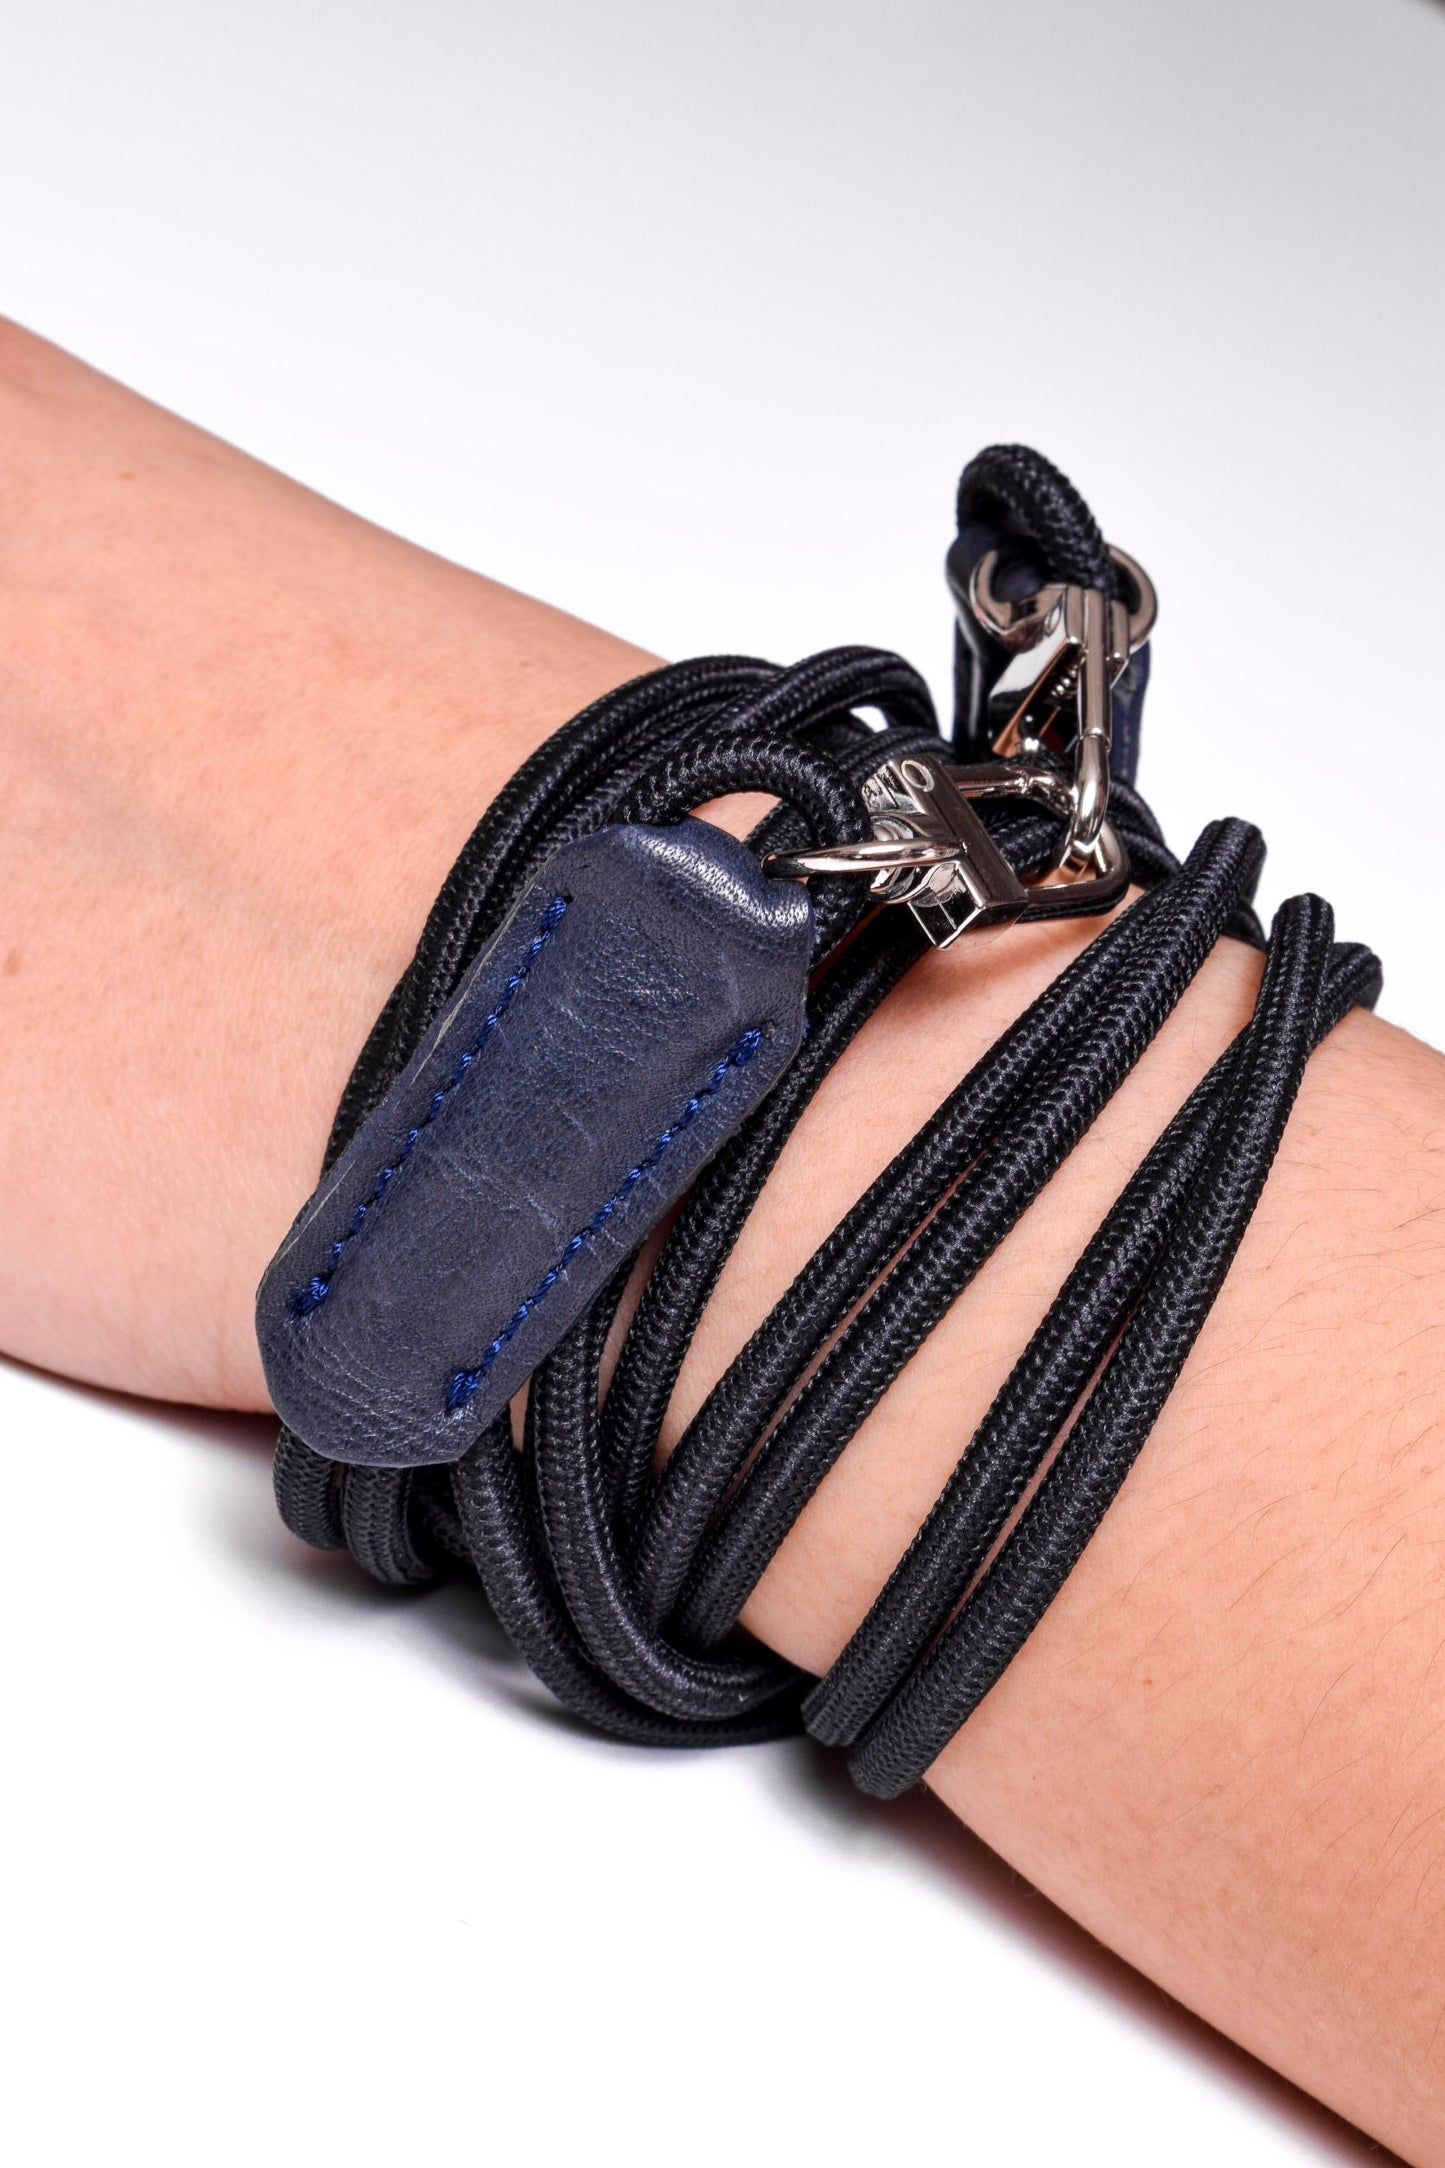 Laser-engraved Silicone Smartphone Support & Double Elastic Rope Bracelet/Crossbody/Necklace. 2 Full-Grain vegetable-tanned Genuine Leather Ends, Blue, Brown, Black or Red.- S23